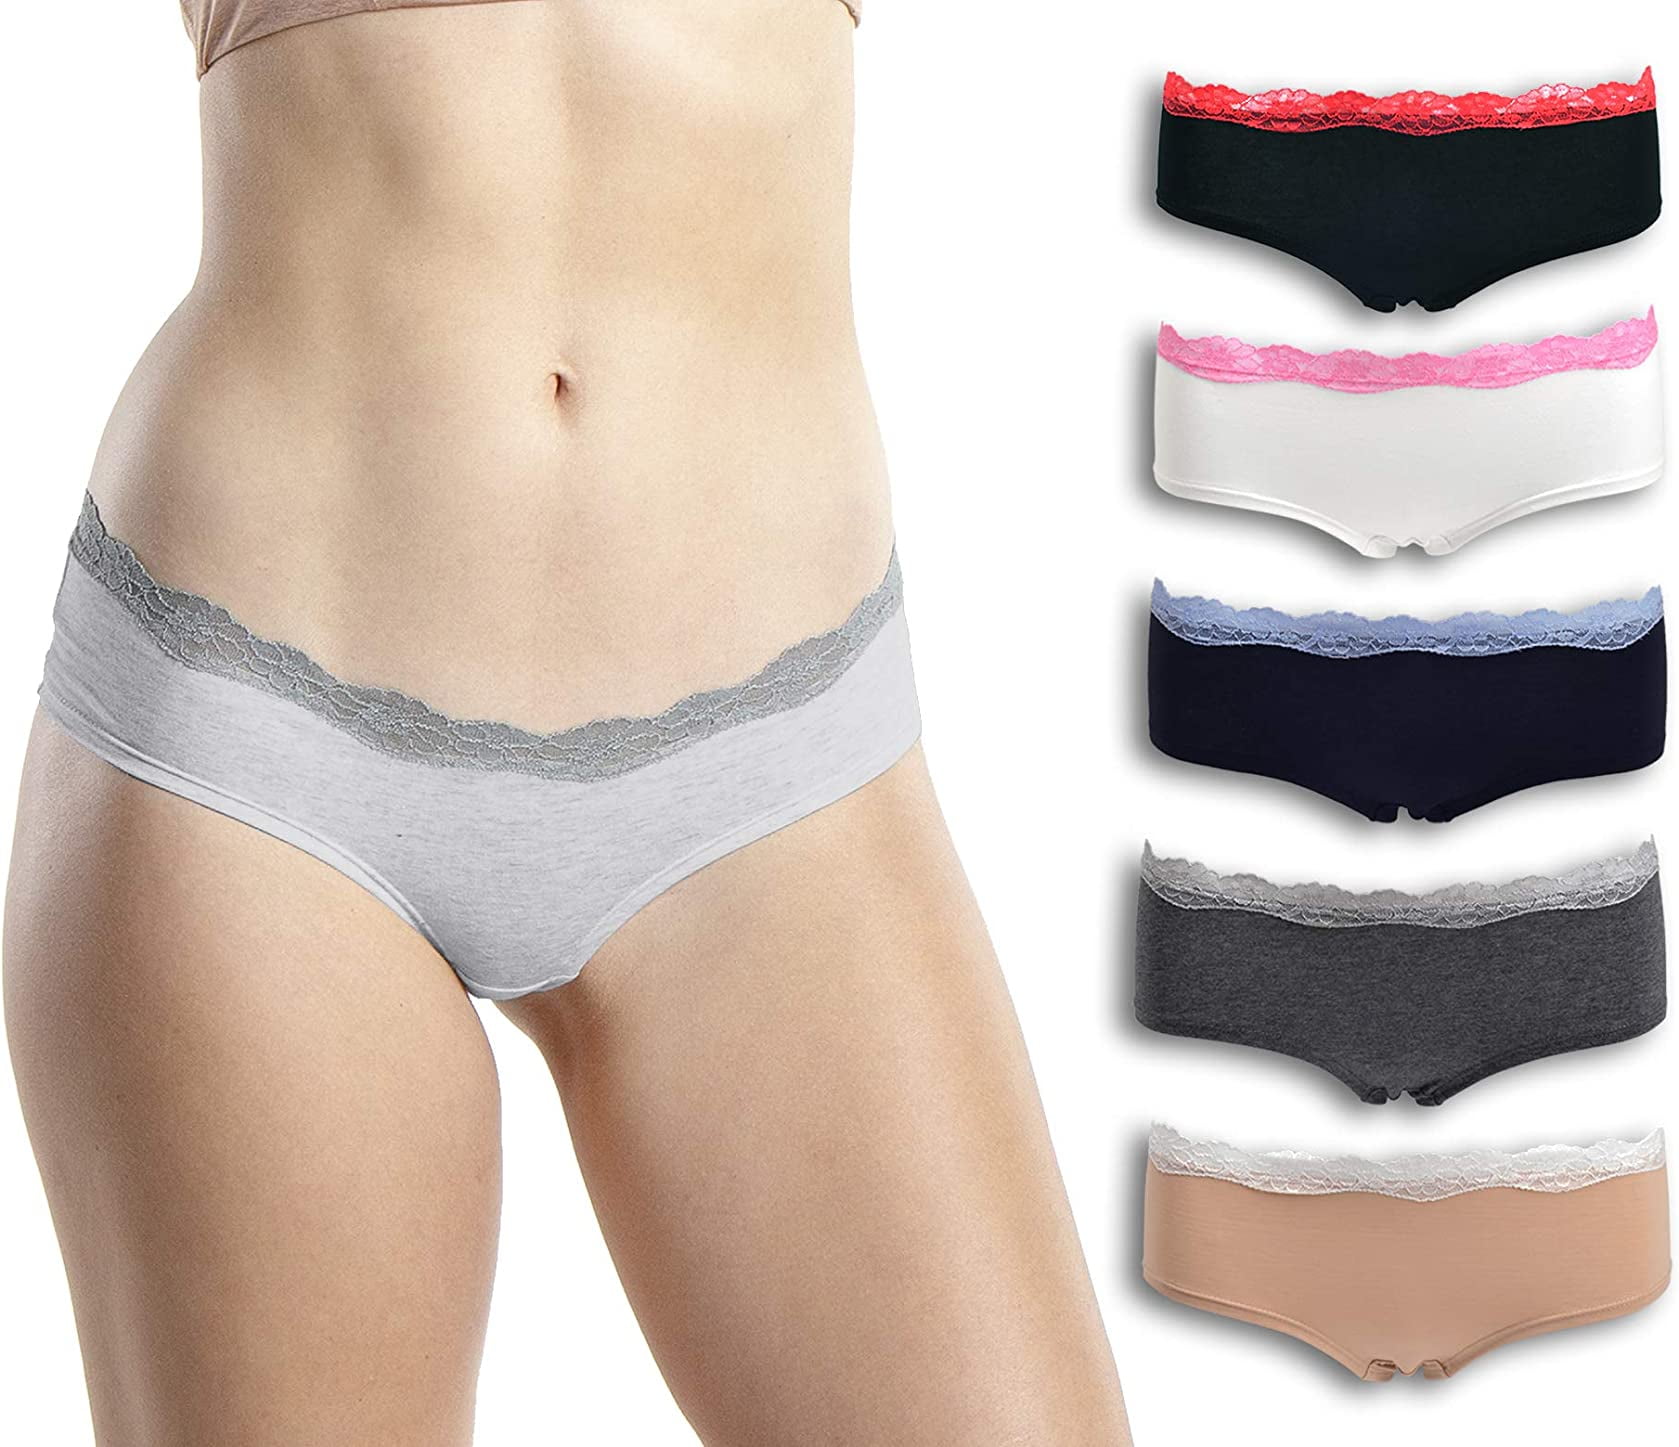 Emprella Women's Underwear Hipster Panties - 5 Pack Colors and Patterns May  Vary